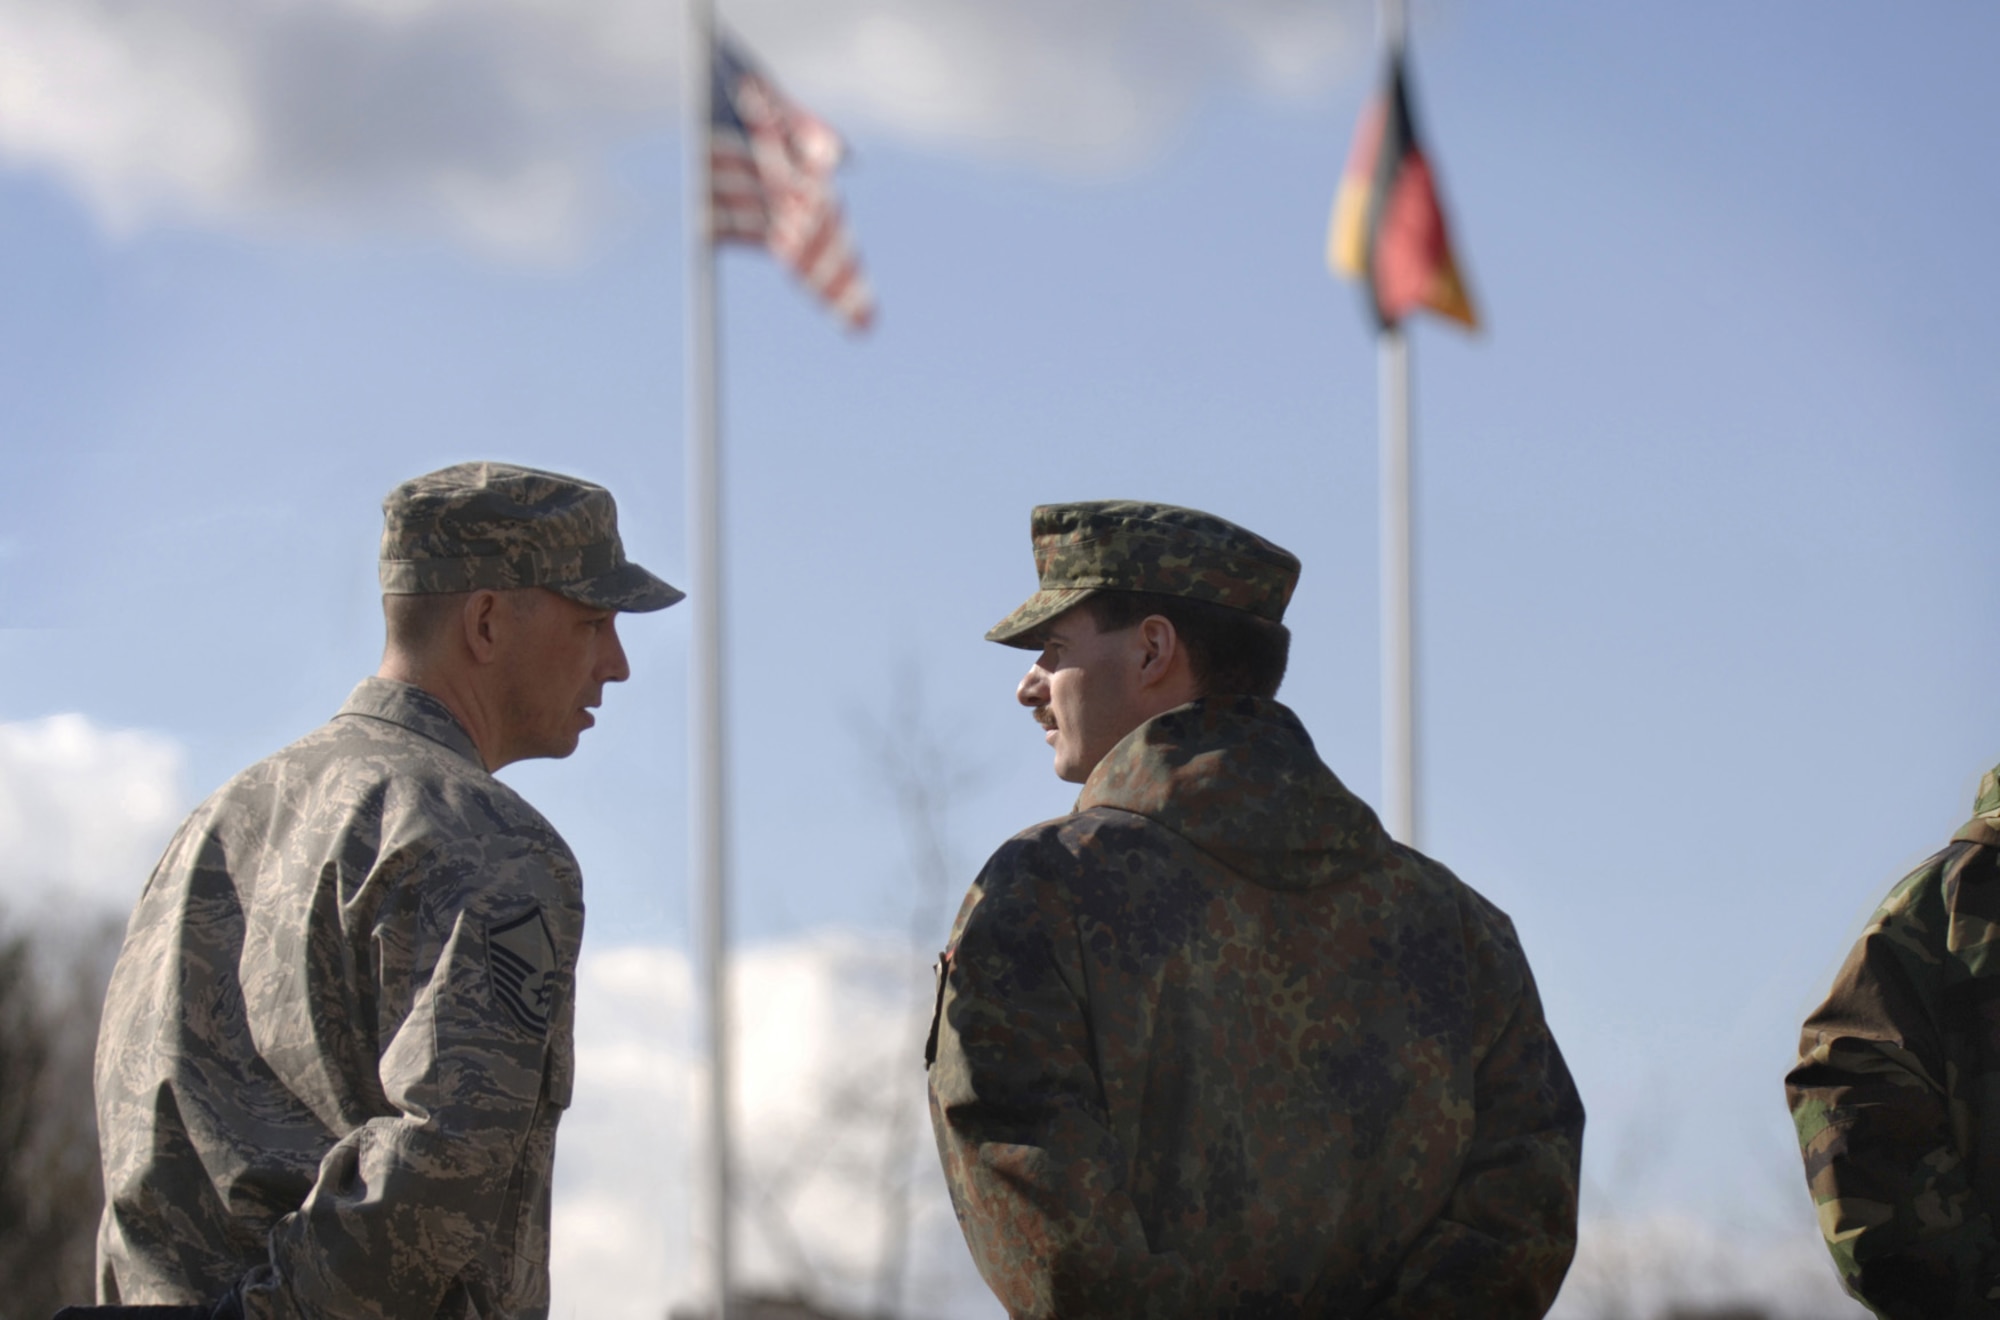 German Air Force Master Sgt. Holger Fels talks with Kisling Noncommissioned Officer Academy instructor, Master Sgt. Karcher Wild before observing a retreat ceremony at Kapaun Air Station, Germany. Sergeant Fels, a German NCO Academy instructor in Appen, Germany, voluntarily enrolled in the six-week academy course designed for U.S. Air Force technical sergeants to prepare for a four-year special duty assignment as an exchange instructor at the Senior NCO Academy at Maxwell Air Force Base, Alabama. Photo by Master Sgt. Scott Wagers